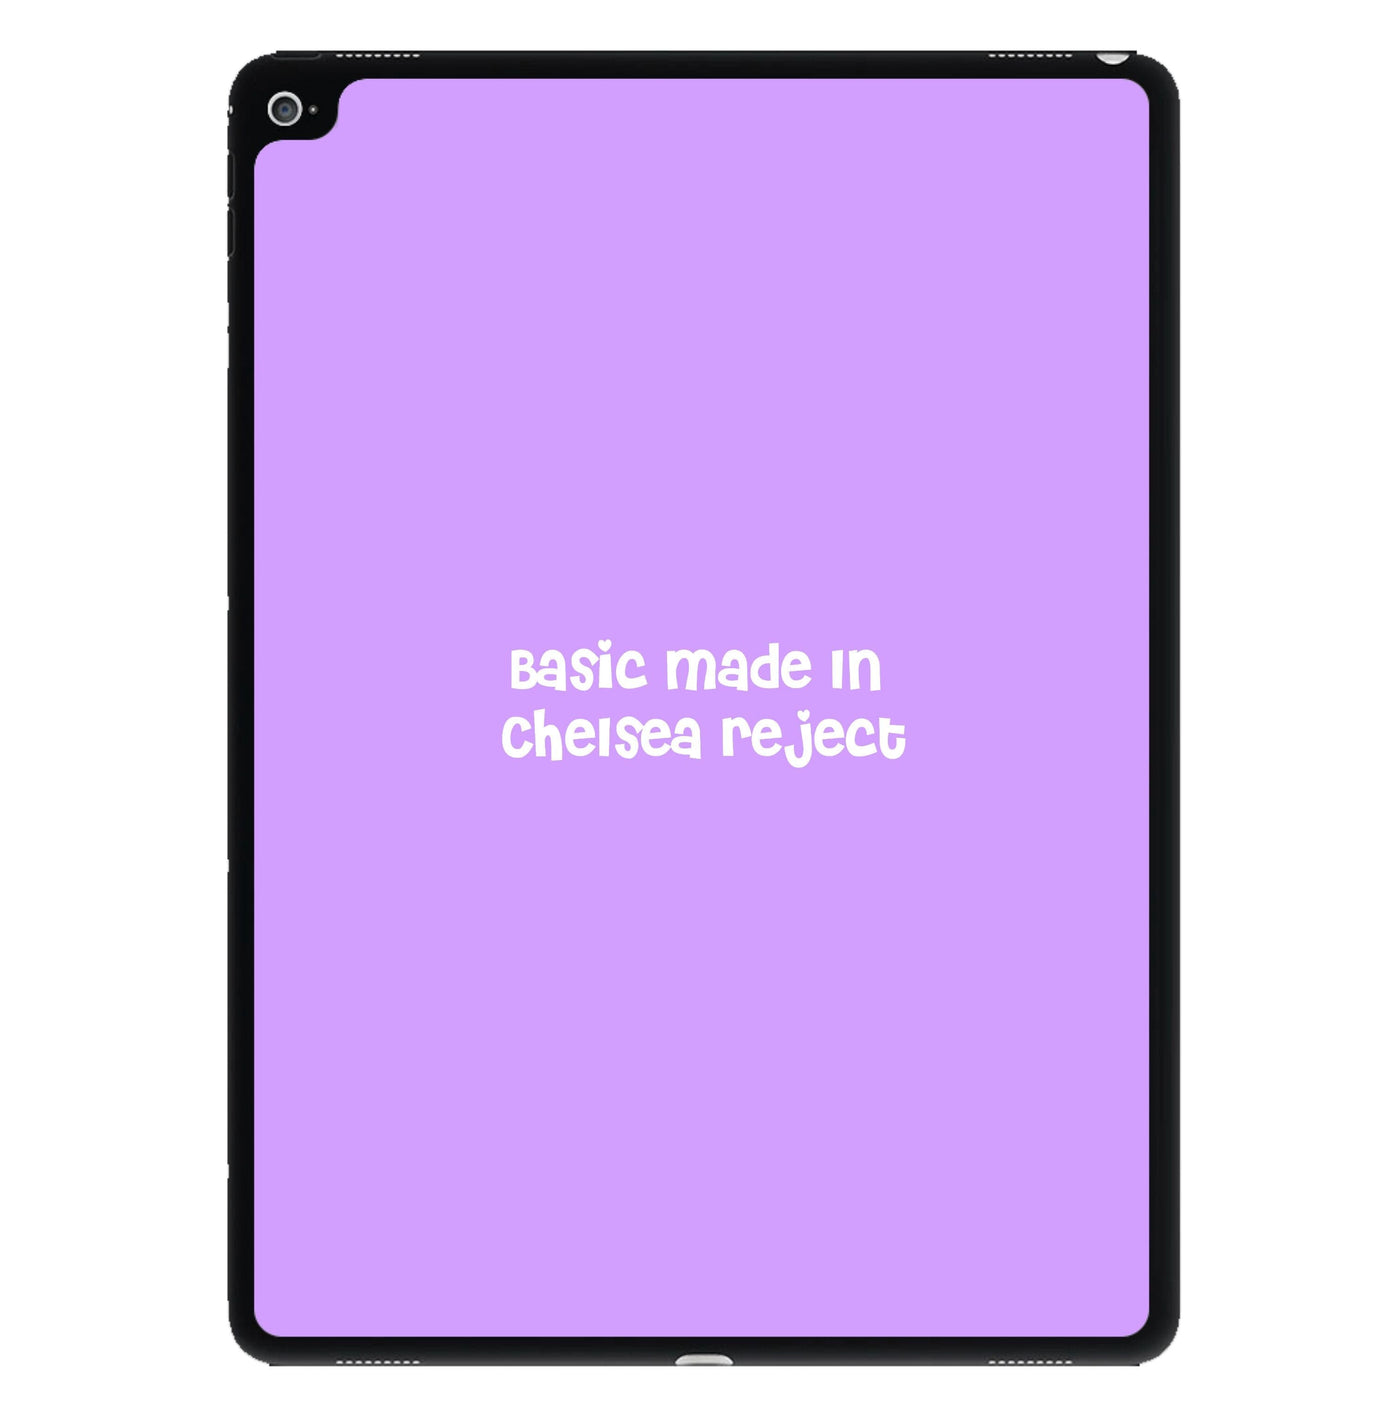 Basic Made In Chelsea Reject - Islanders iPad Case